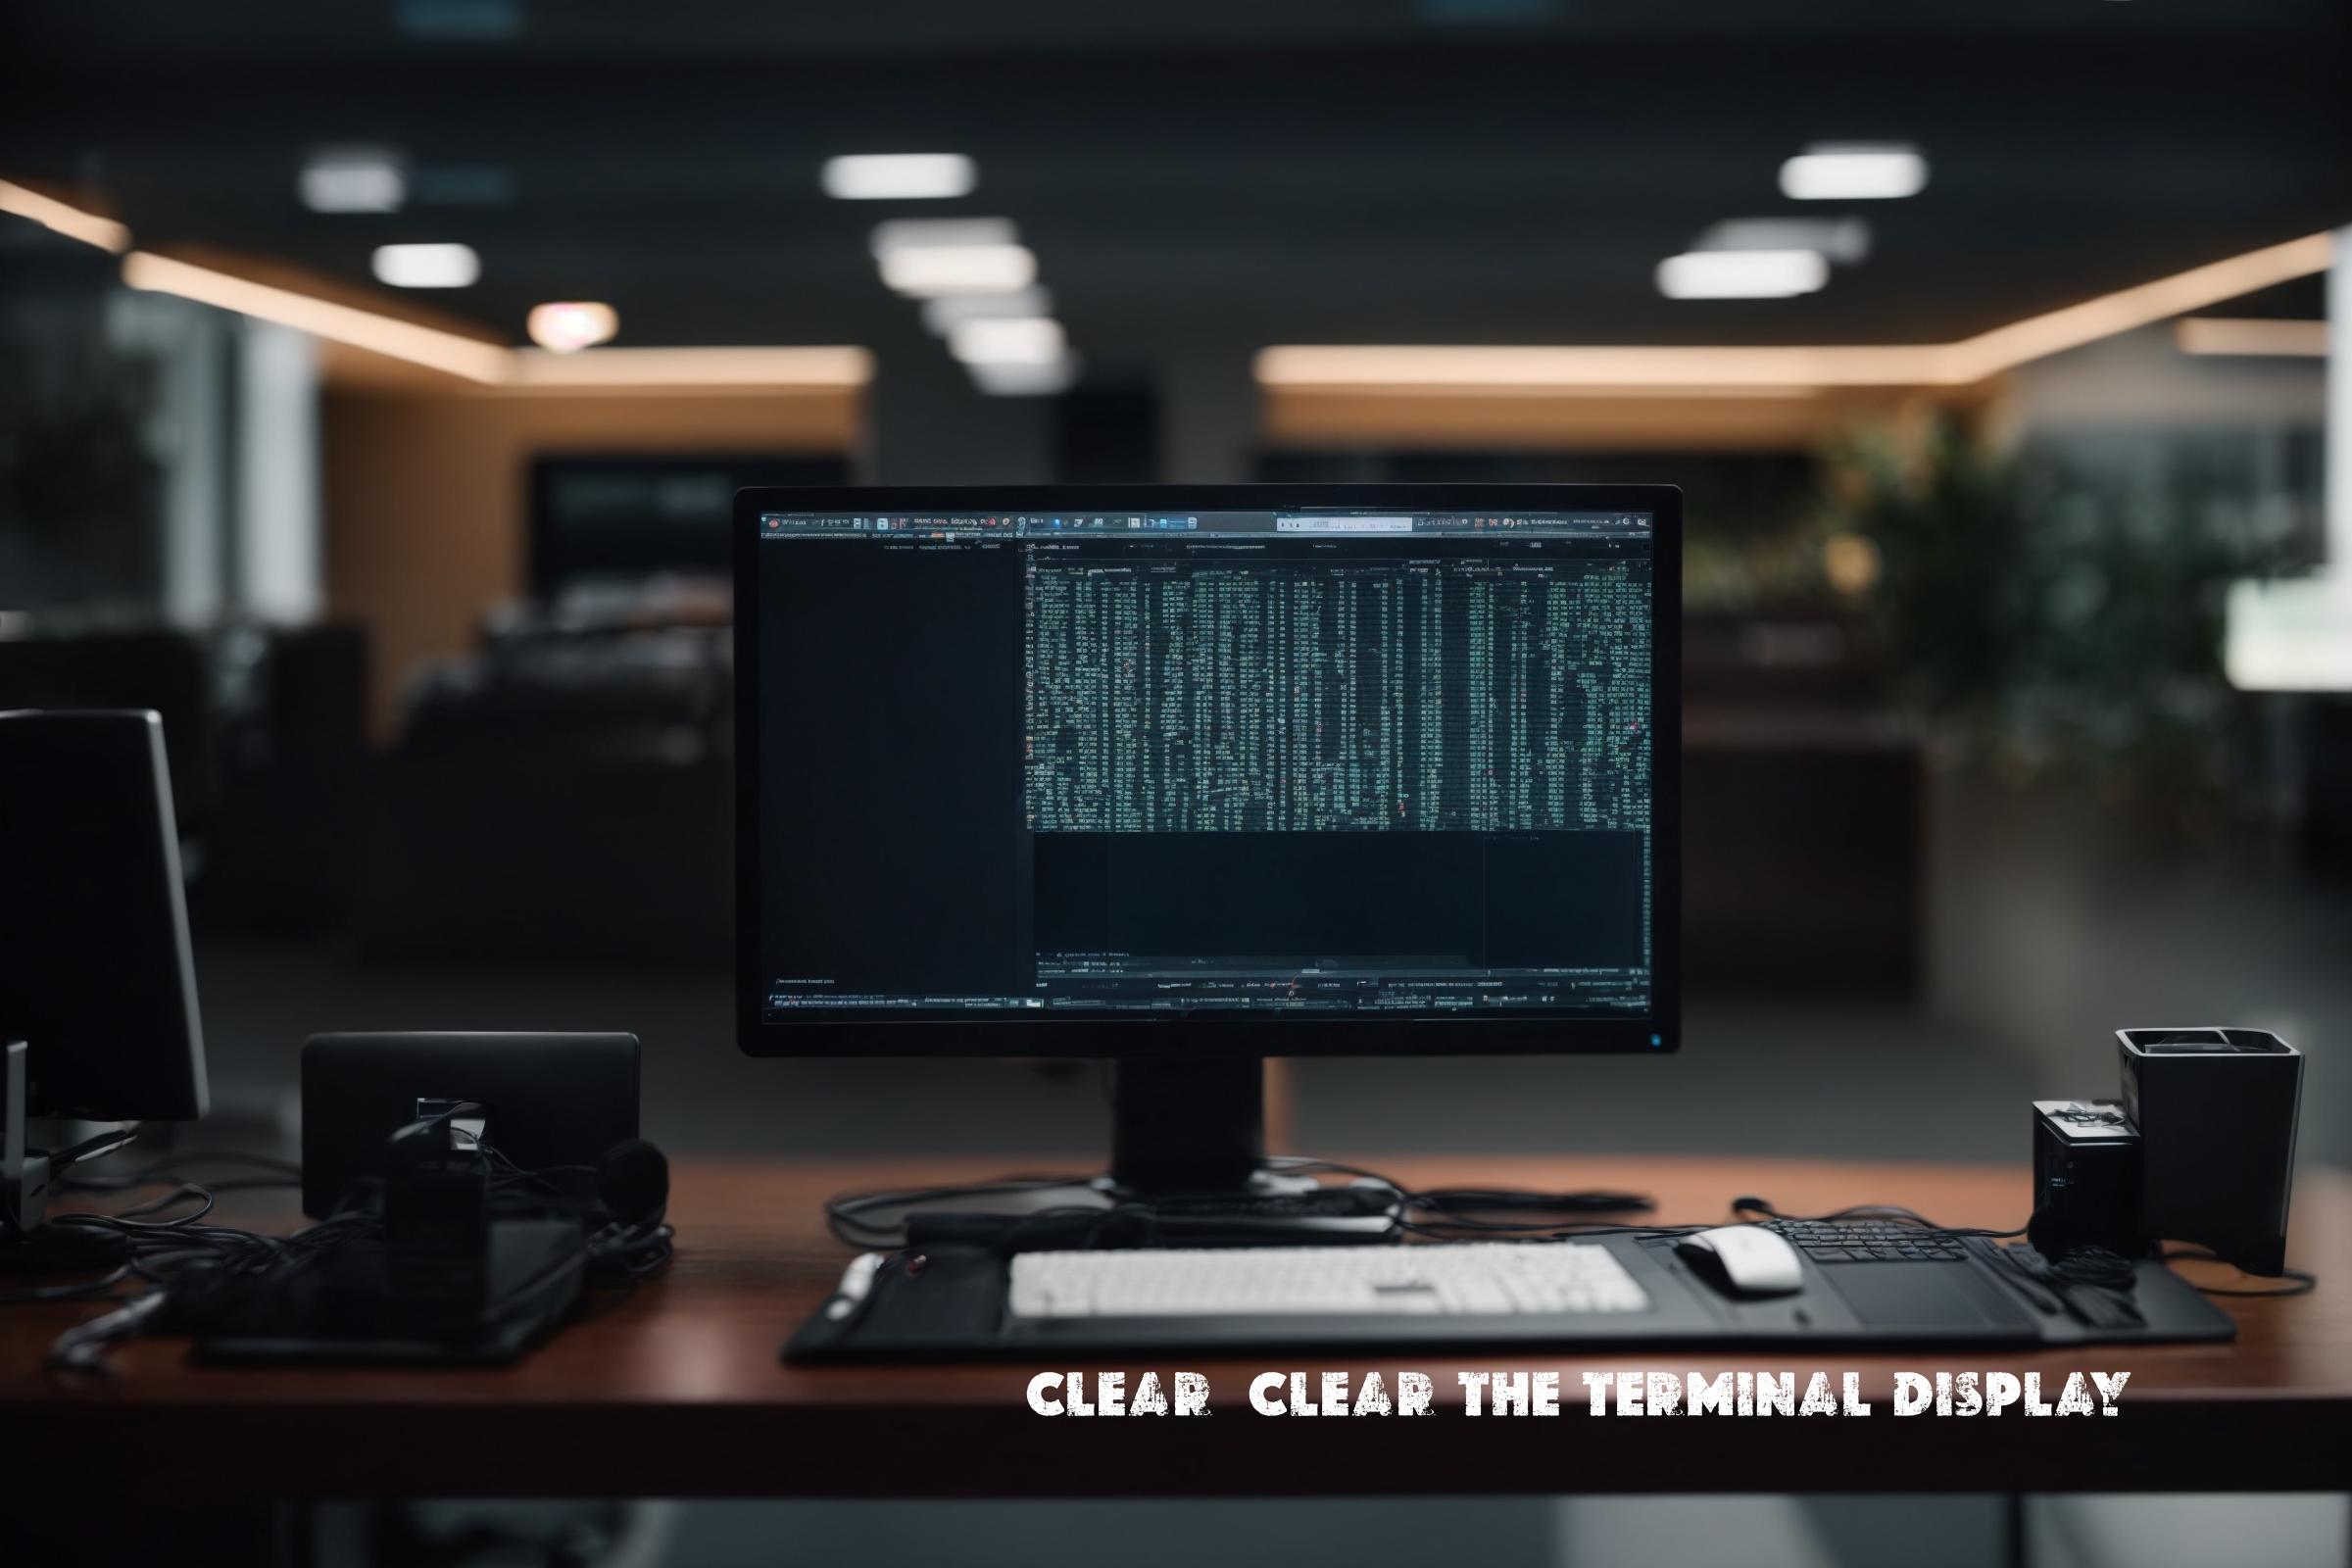 Clear (Clear the terminal display) – Usage in Linux Systems